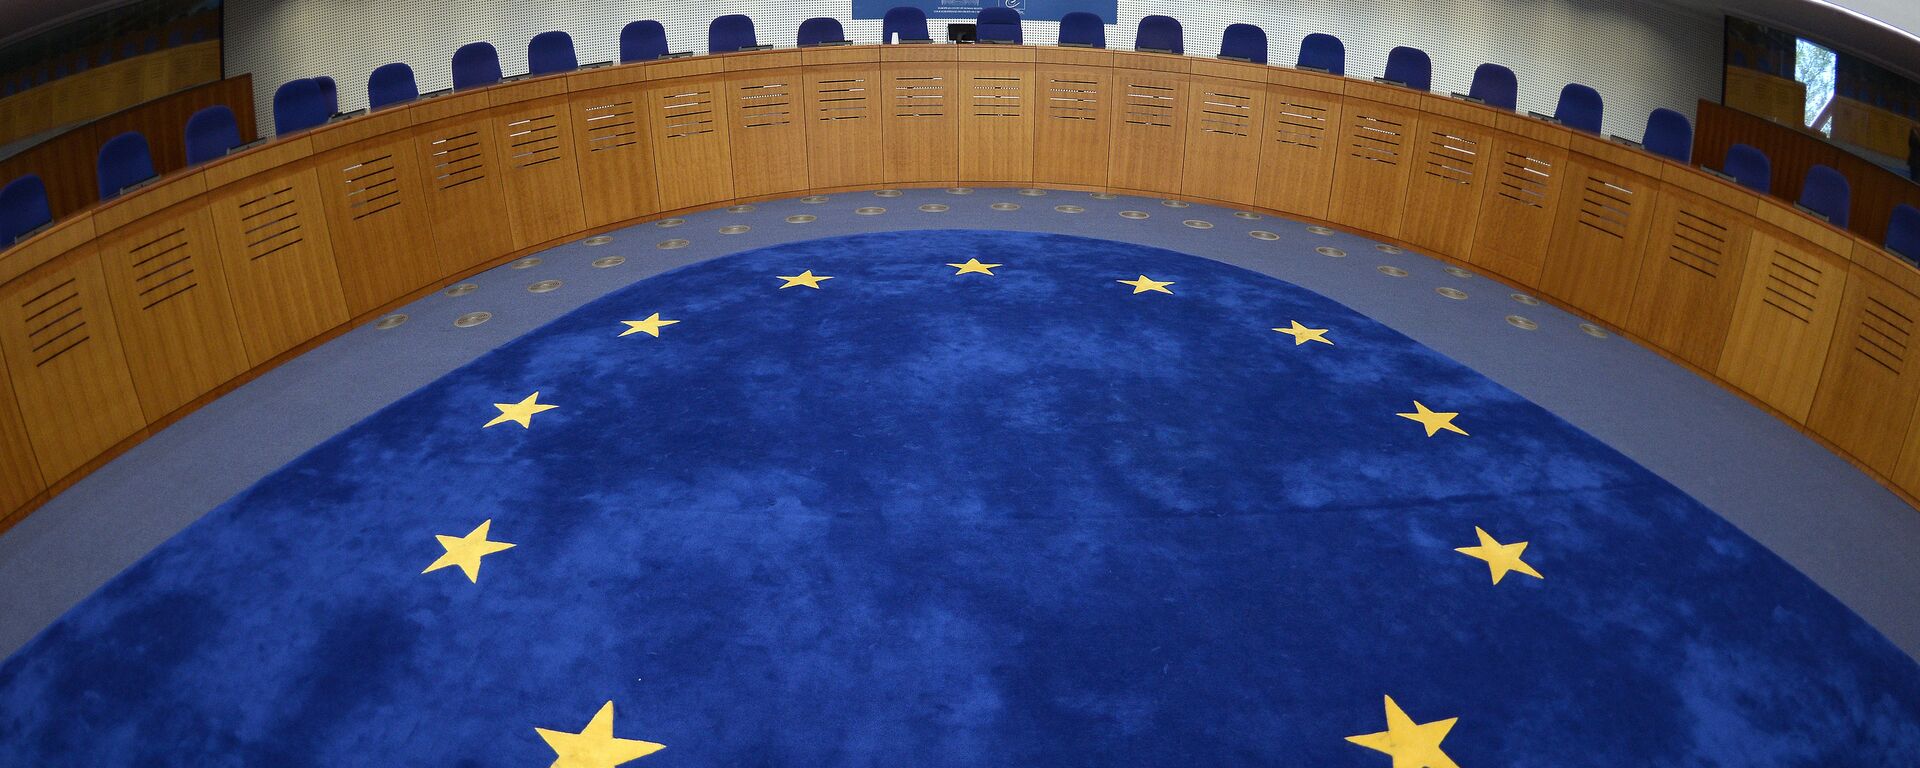 Picture taken on April 23, 2015 shows the audience room of the European Court for Human Rights, in Strasbourg, eastern France - Sputnik International, 1920, 21.09.2021